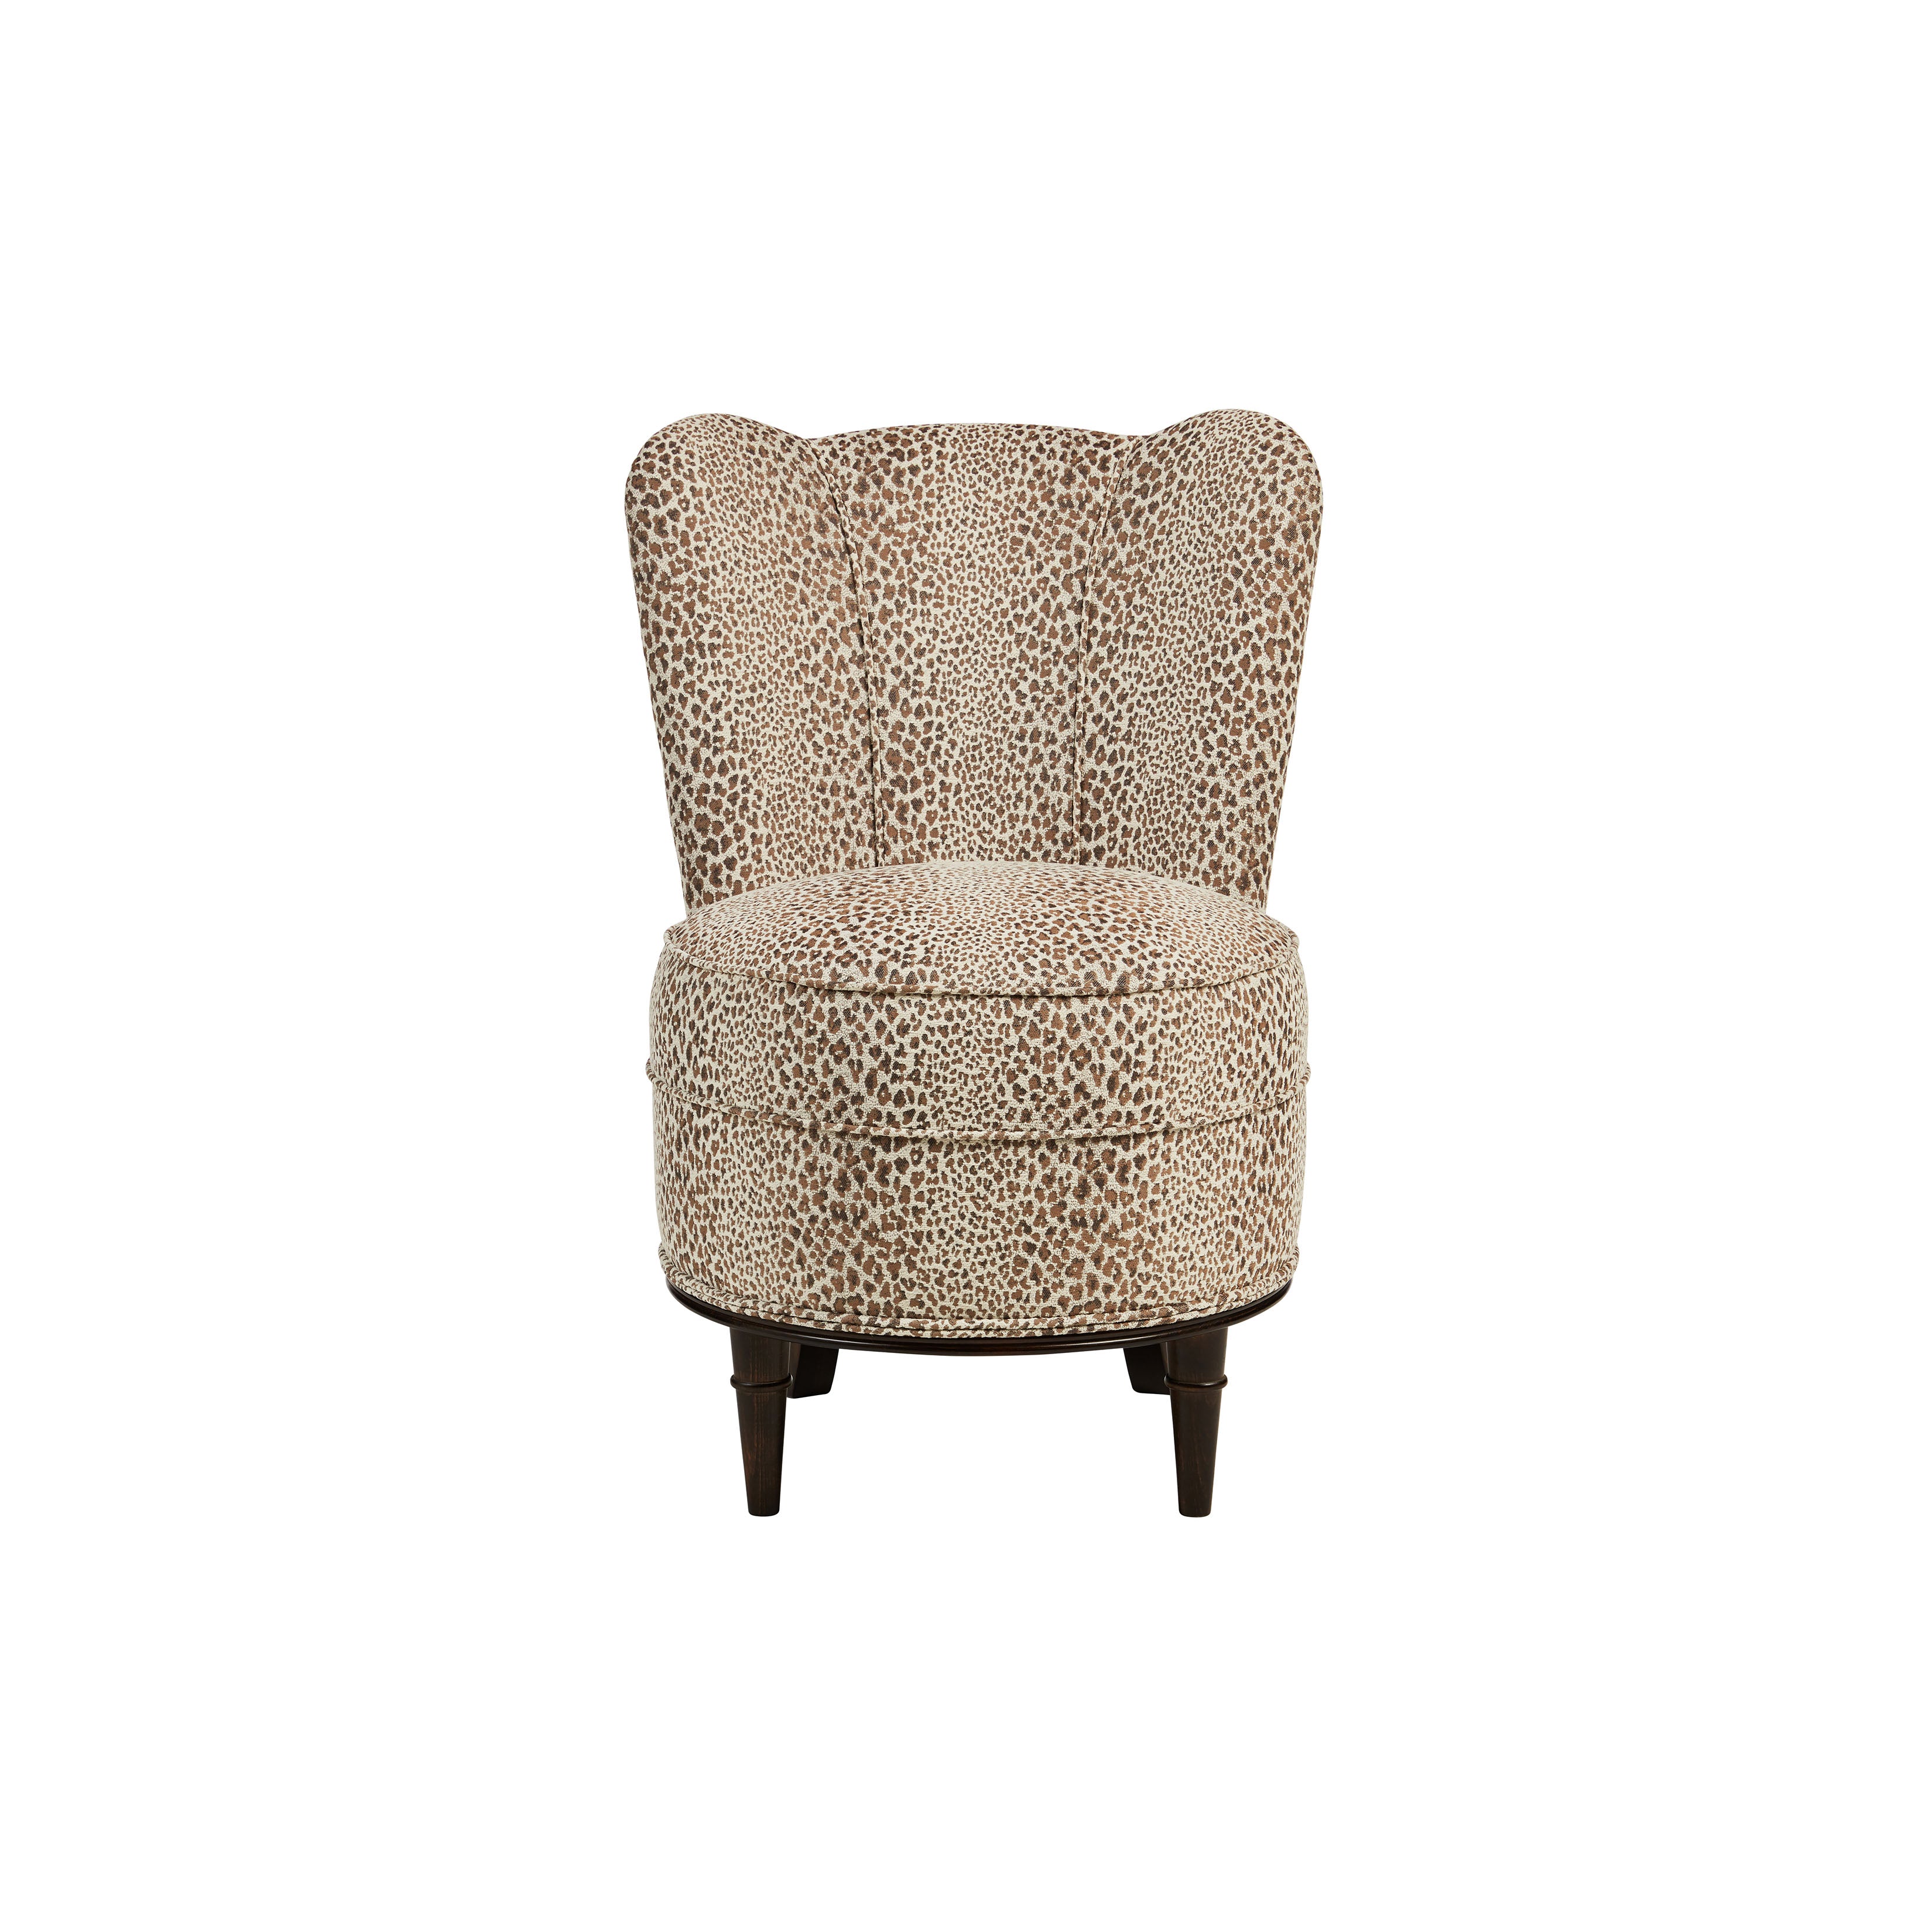 Nina Campbell Alice Chair in Bagatelle Weave Walnut/Ivory